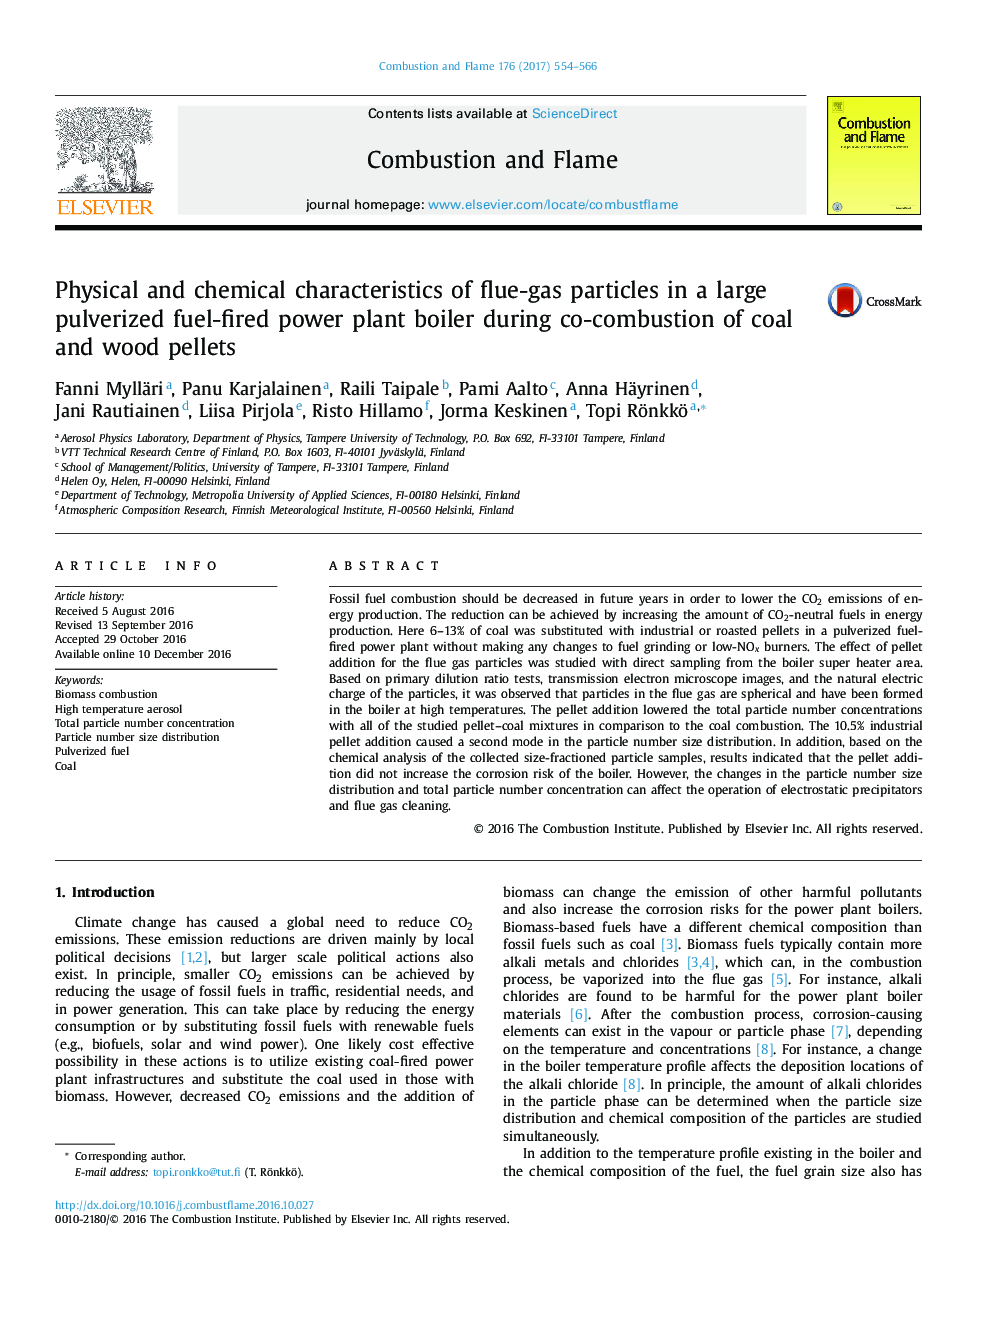 Physical and chemical characteristics of flue-gas particles in a large pulverized fuel-fired power plant boiler during co-combustion of coal and wood pellets